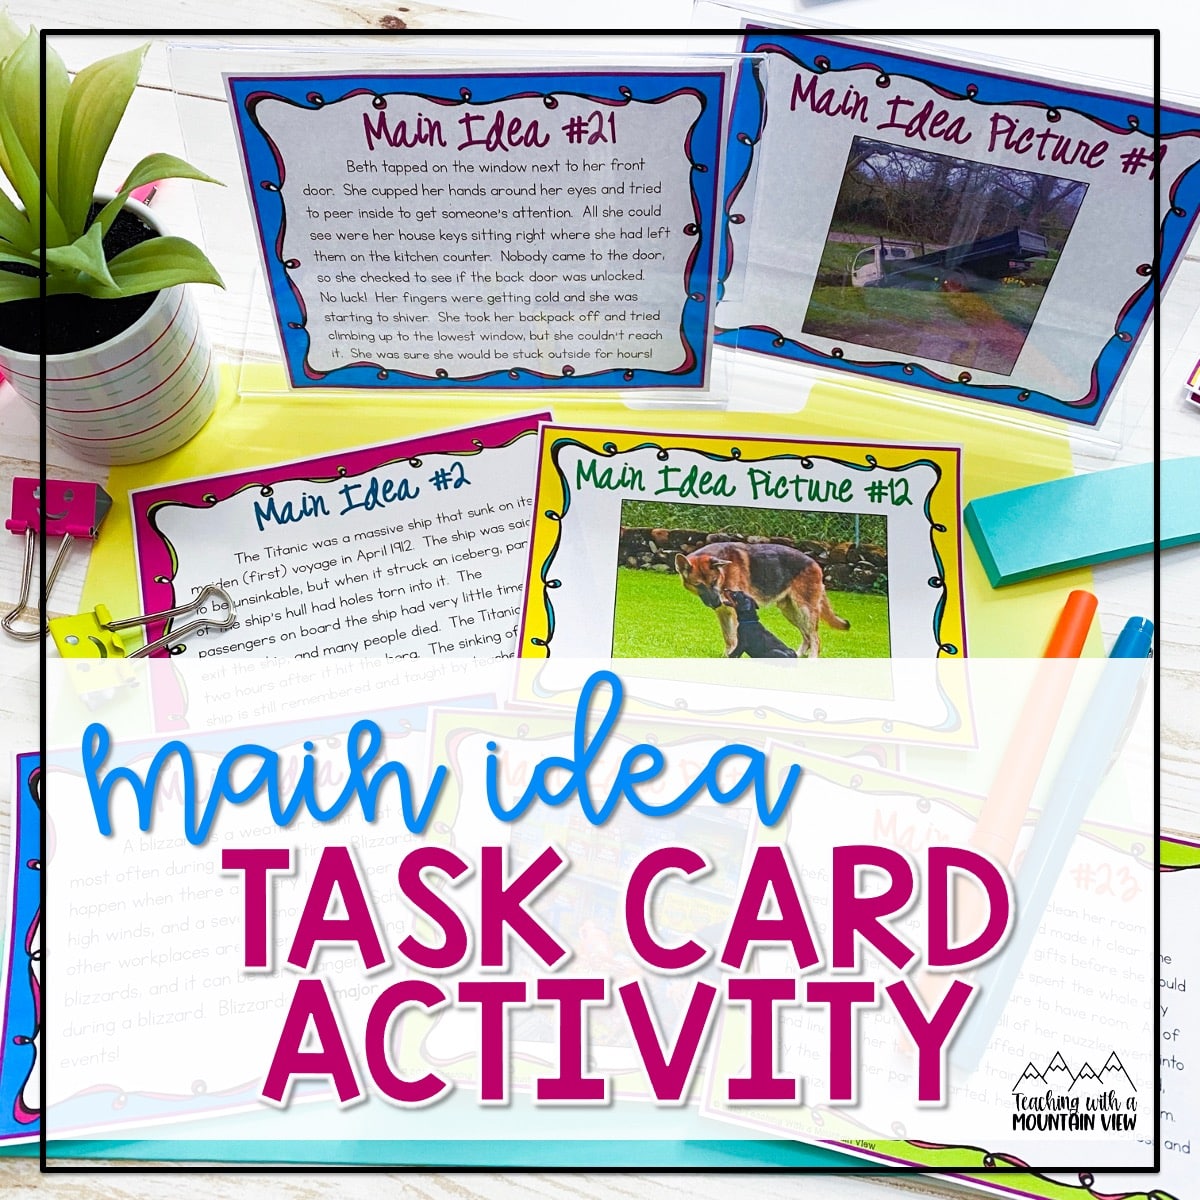 Learn how to use main idea task cards for this quick and easy main idea activity. Also includes resources for main idea vs. theme.